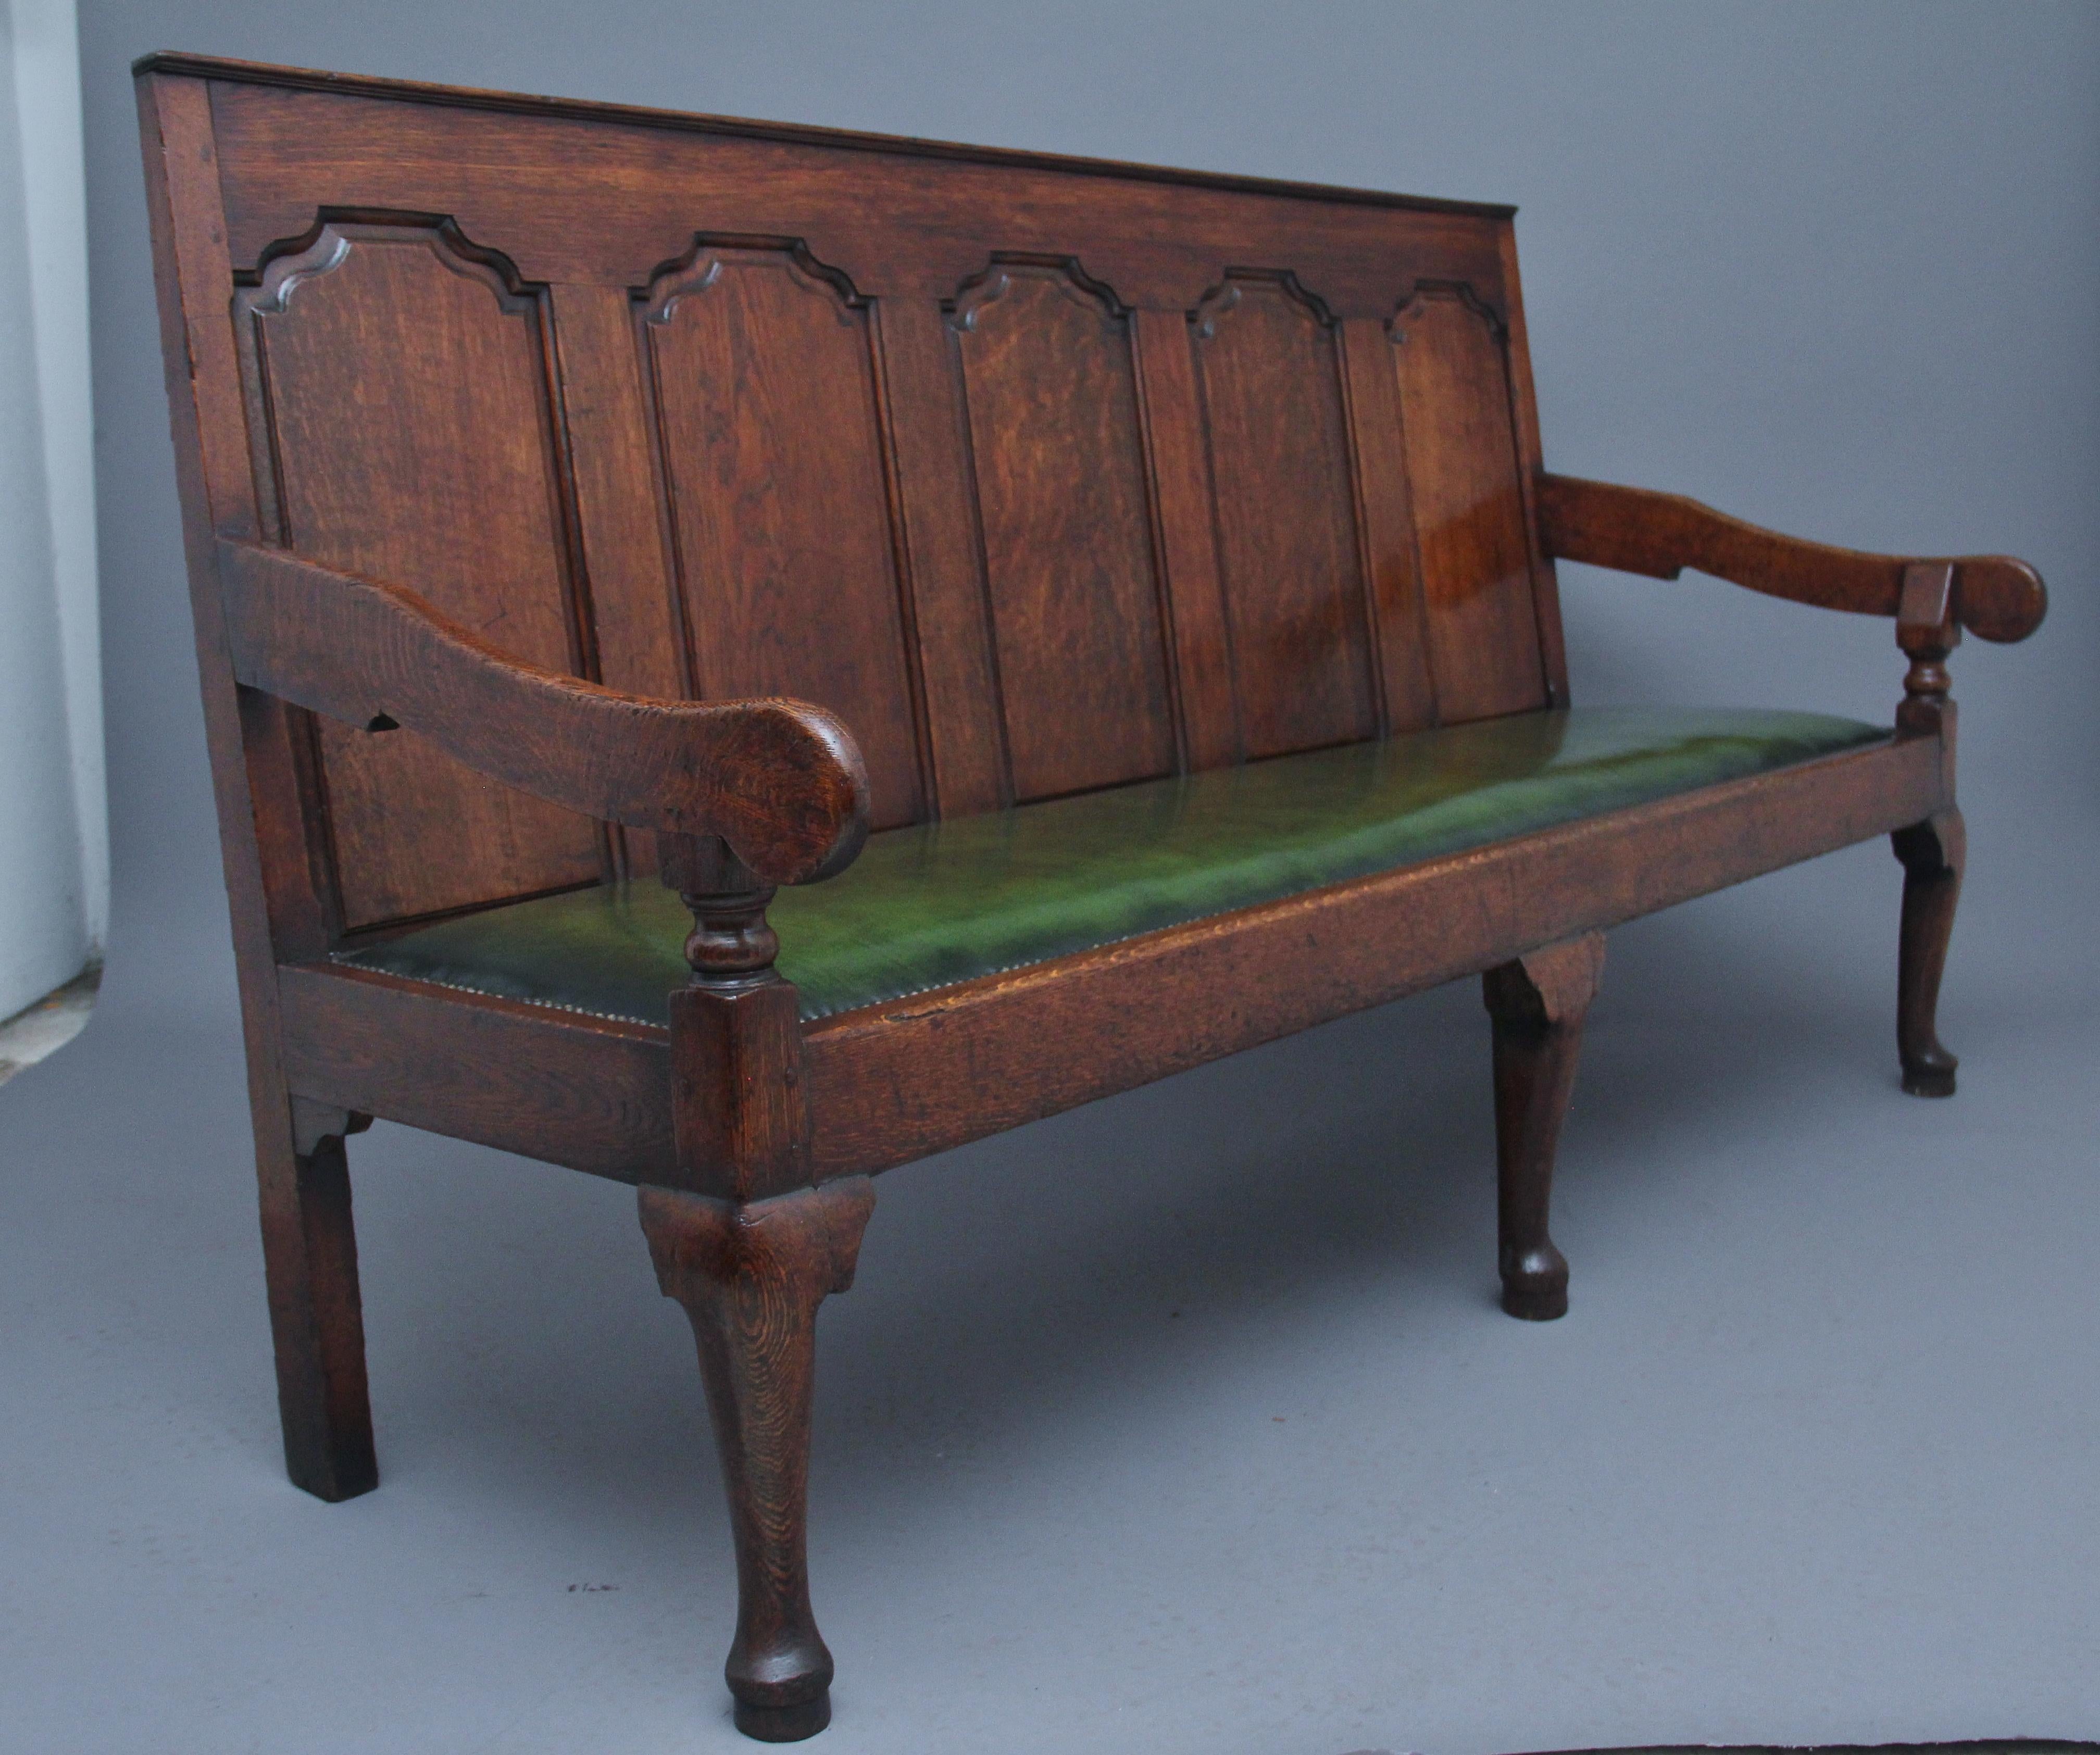 18th century oak settle / bench the high back with five fielded oak panels flanked by down swept arms on turned supports enclosing the recently upholstered green leather seat with brass stud decoration, supported on cabriole front legs and square